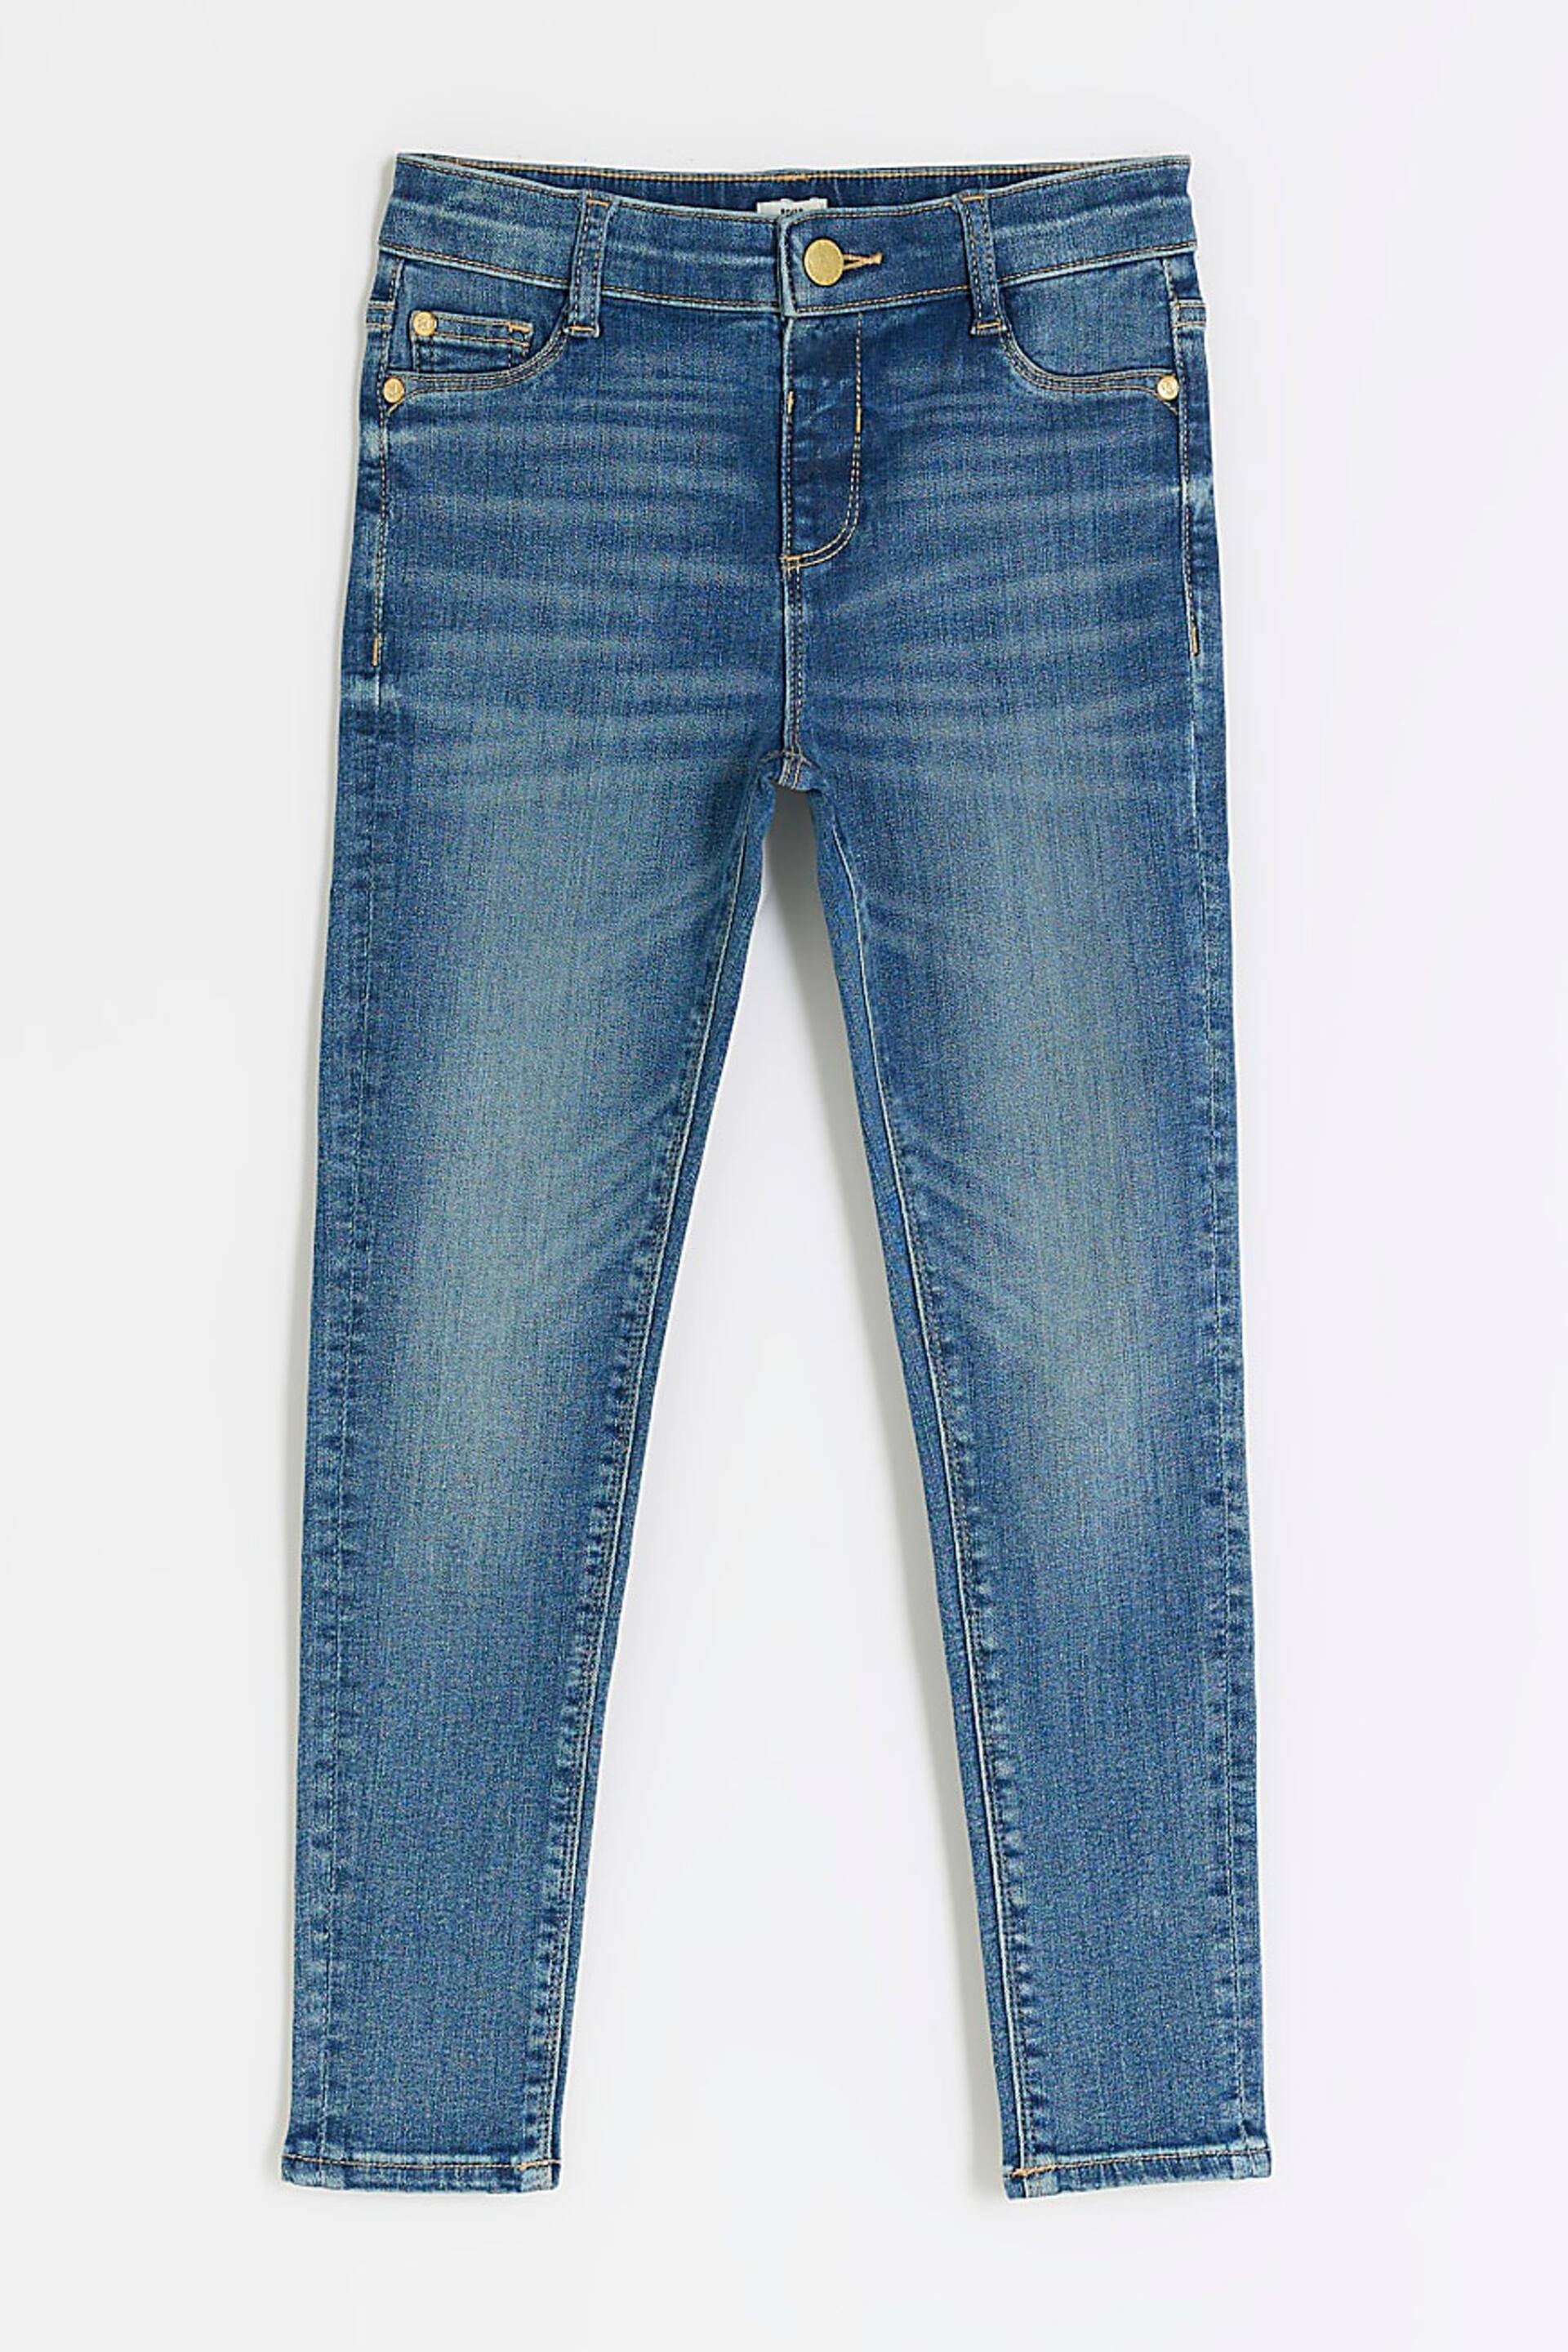 River Island Blue Girls Mid Wash Molly Jeans - Image 1 of 4